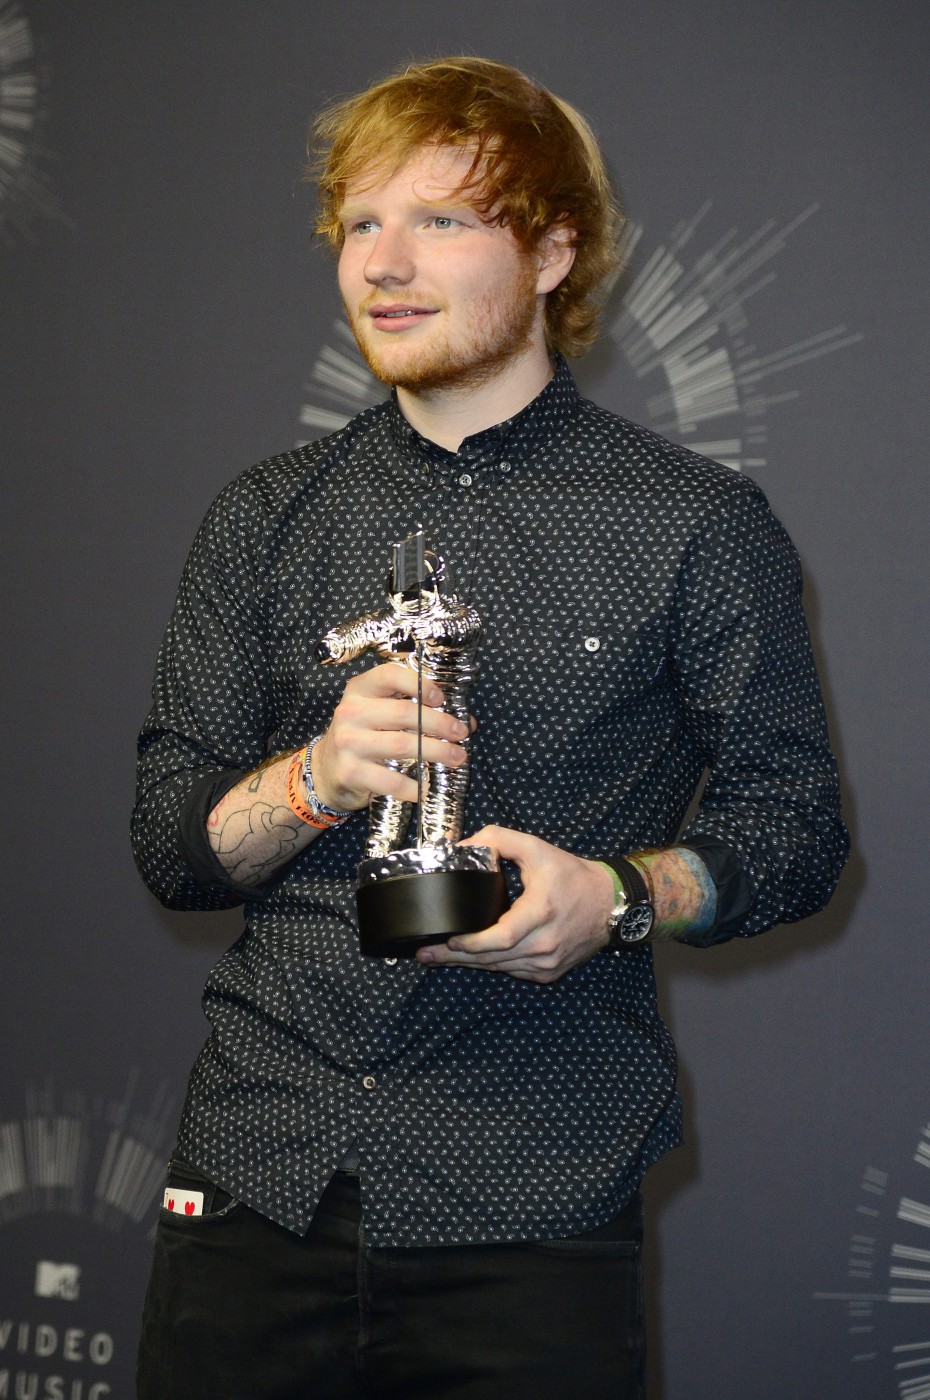 Looks like we're not the only one who's extremely excited to catch Ed Sheeran live... (Photo by EPA)